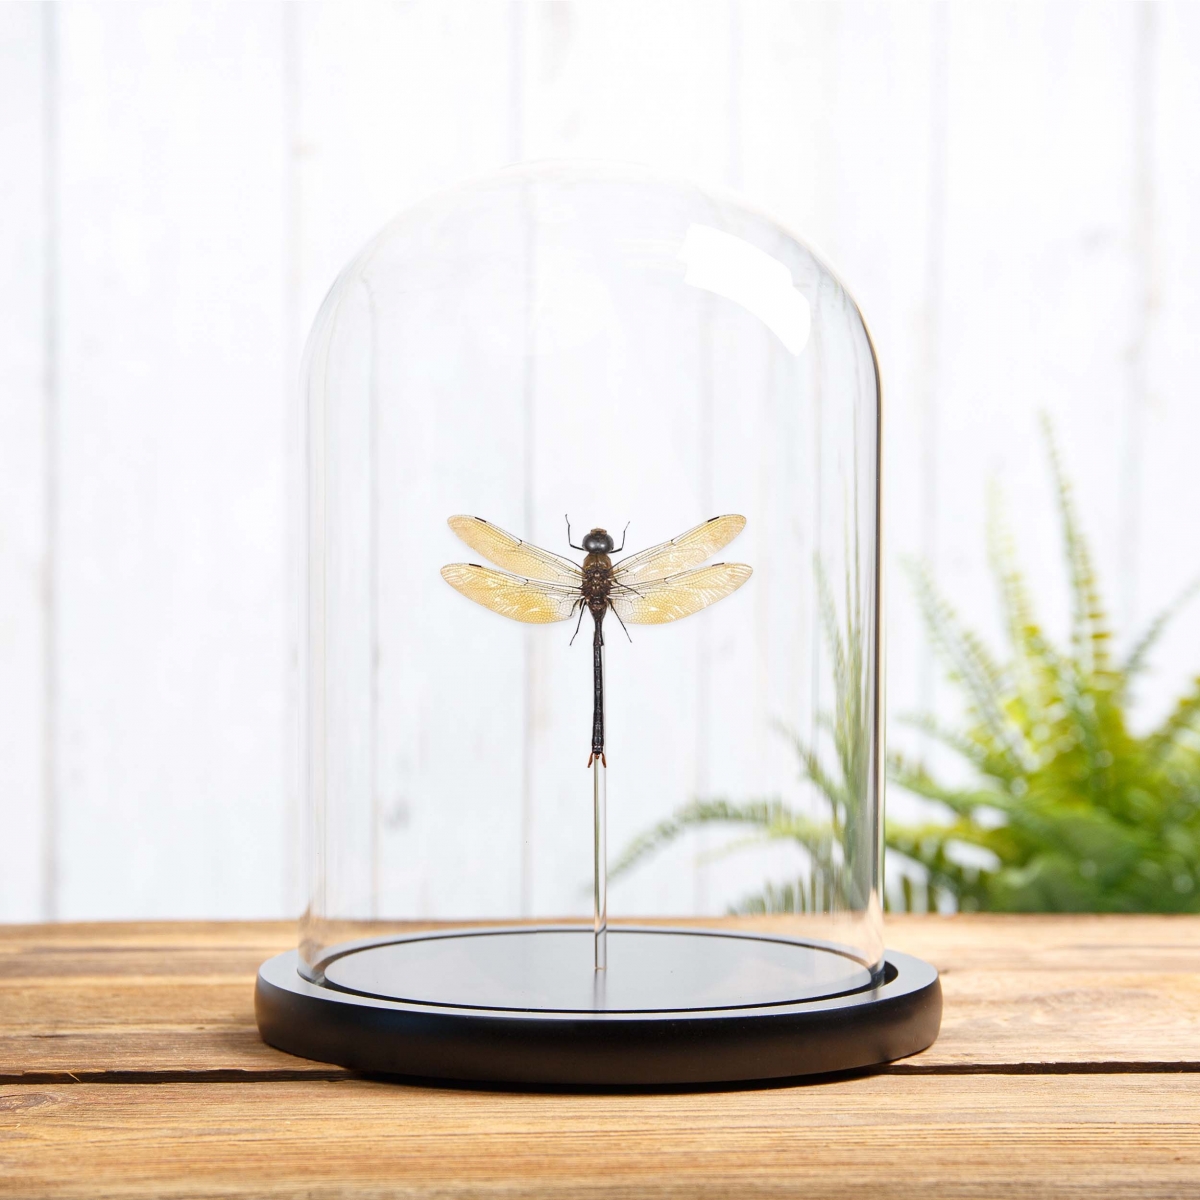 Minibeast Dragonfly in Glass Dome with Wooden Base (Anax sp)